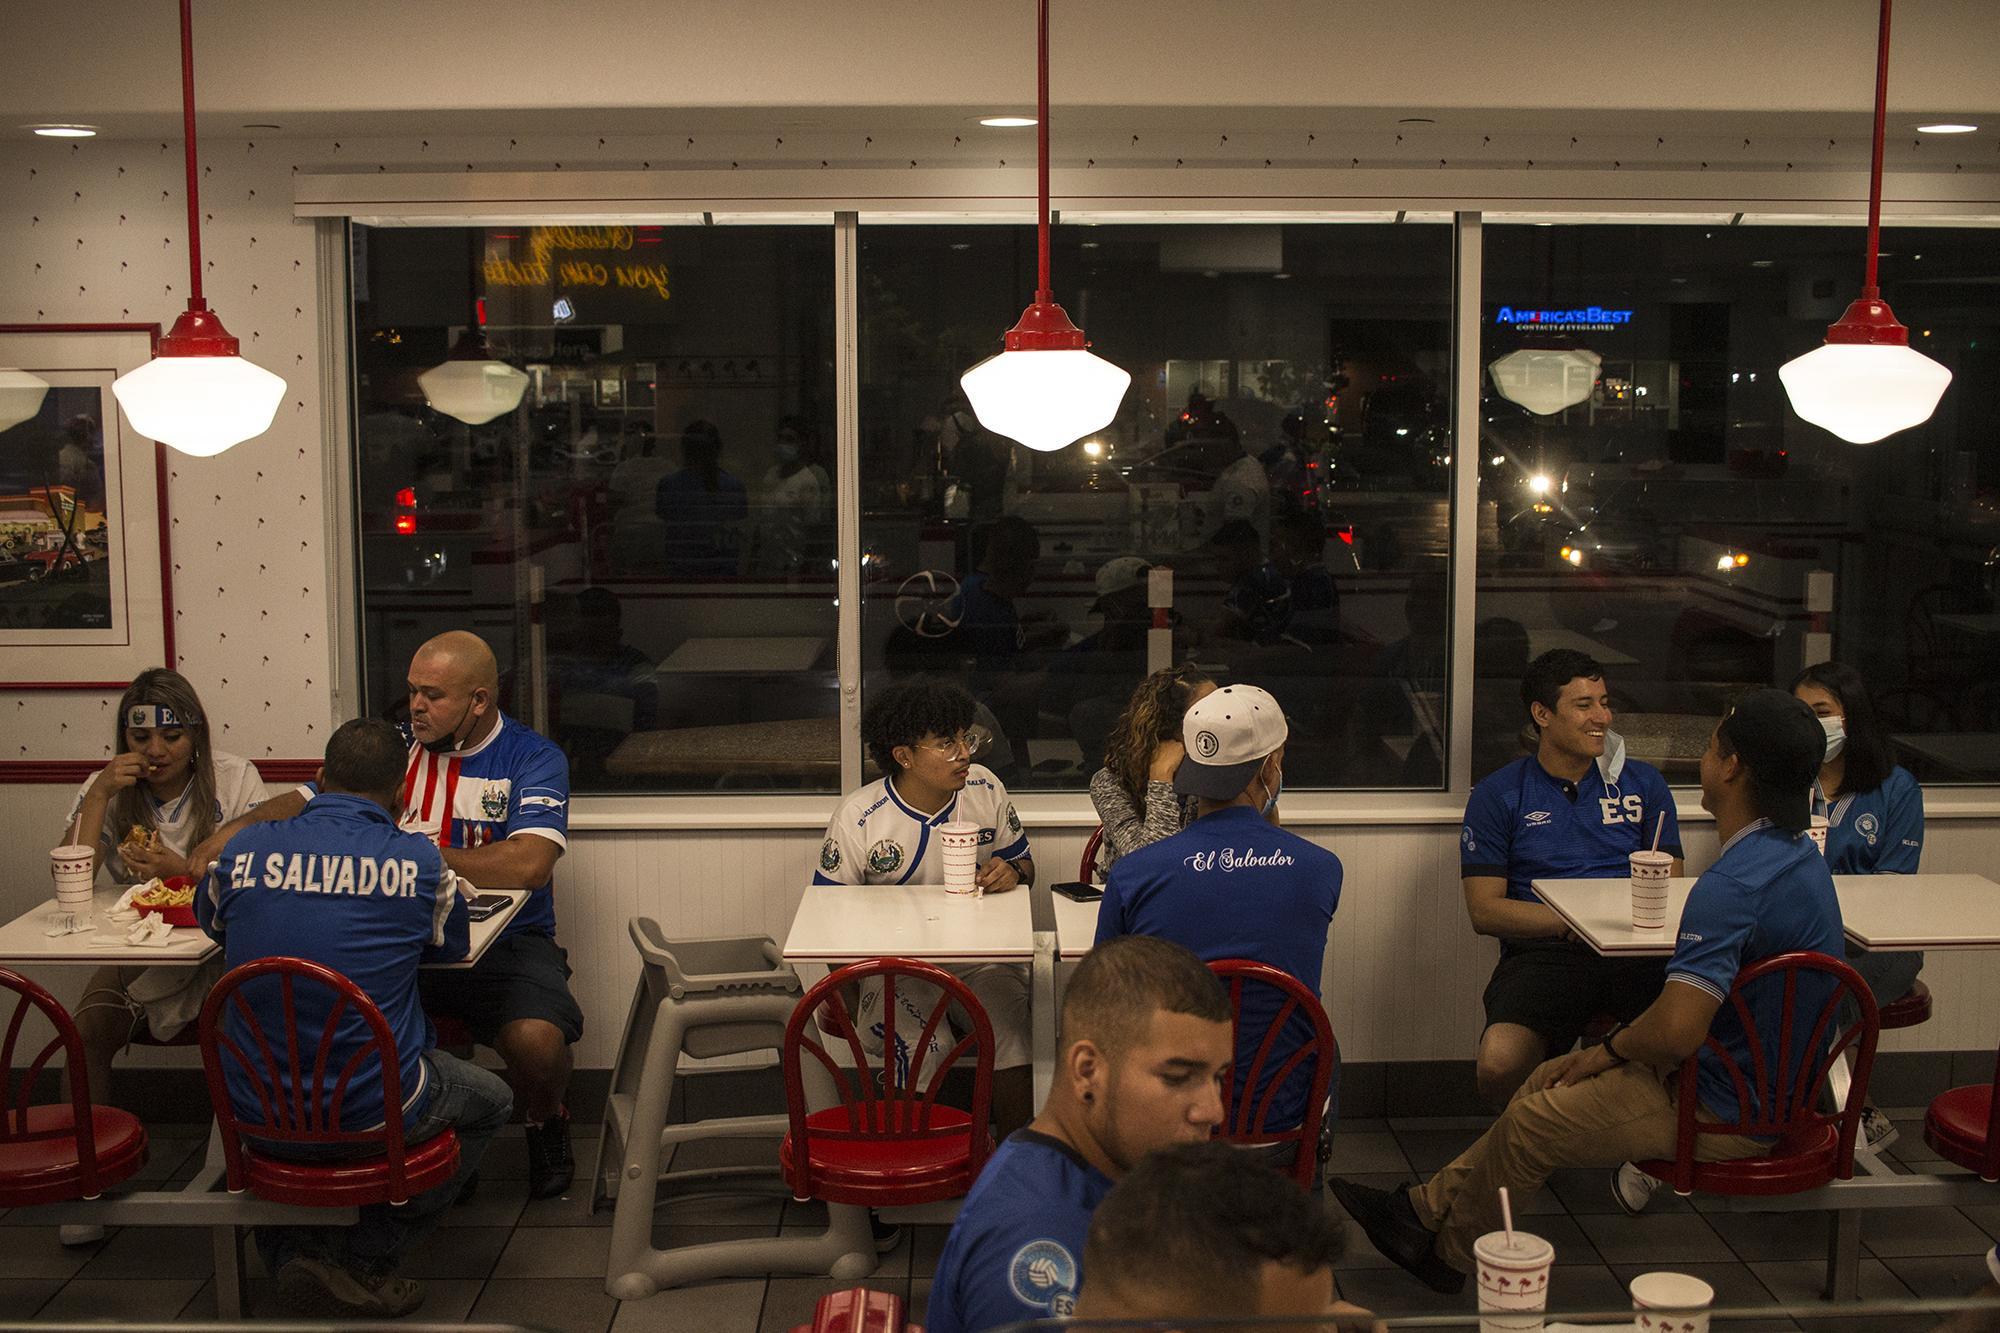 Fans meet at In-N-Out Burger in Carson, California, near the stadium where La Selecta played against Costa Rica. It